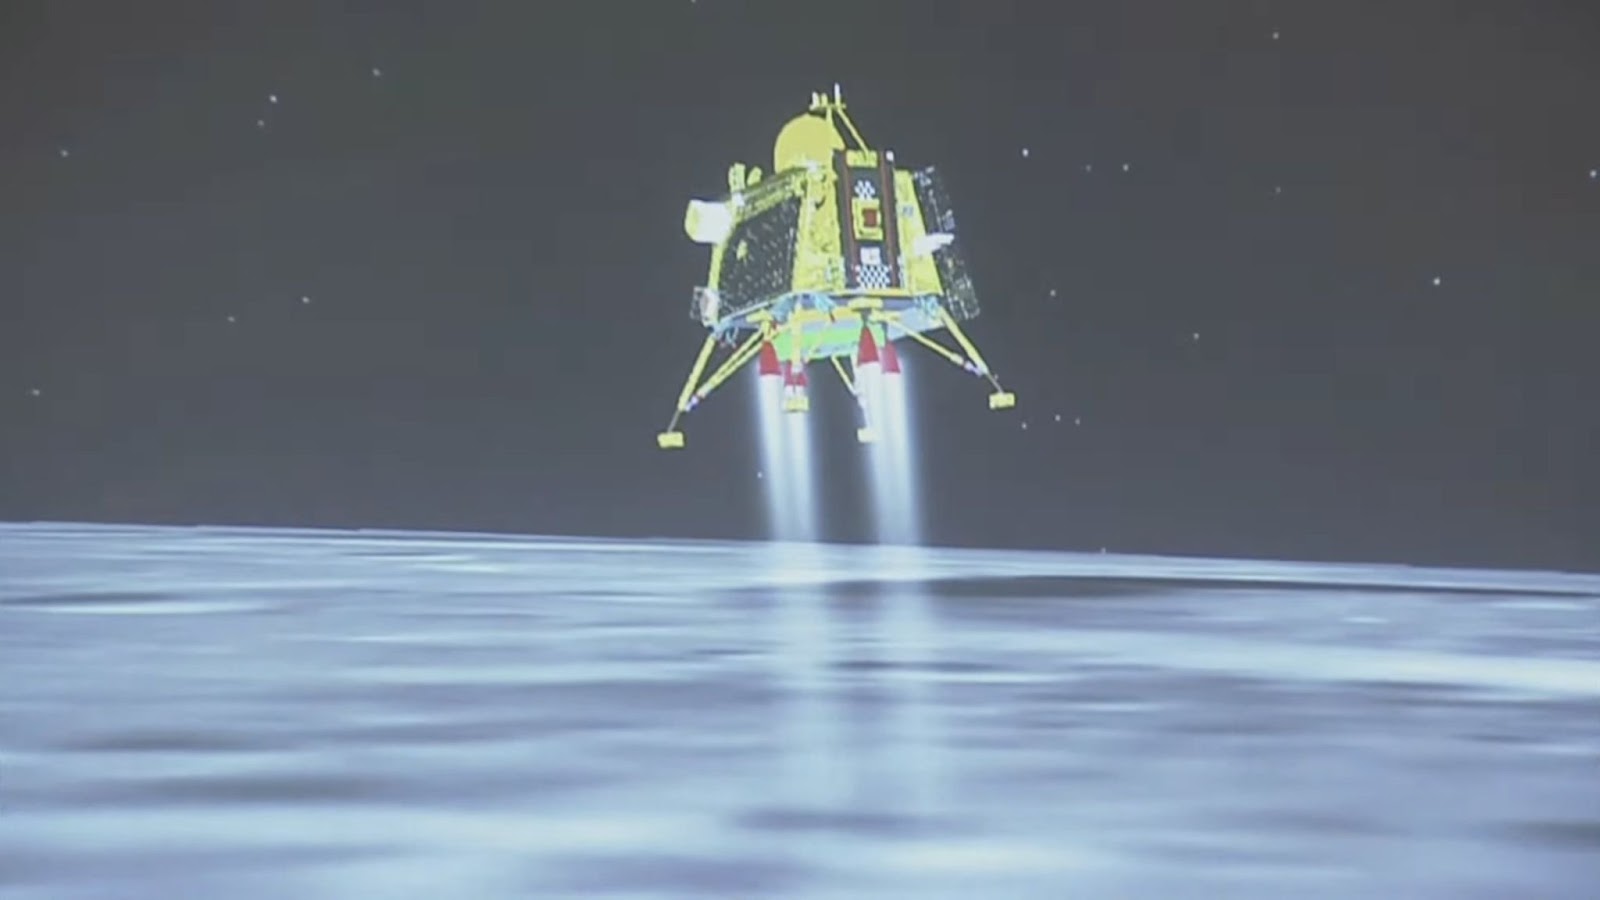 A CGI rendering of India’s Chandrayaan-3 spacecraft landing on the moon